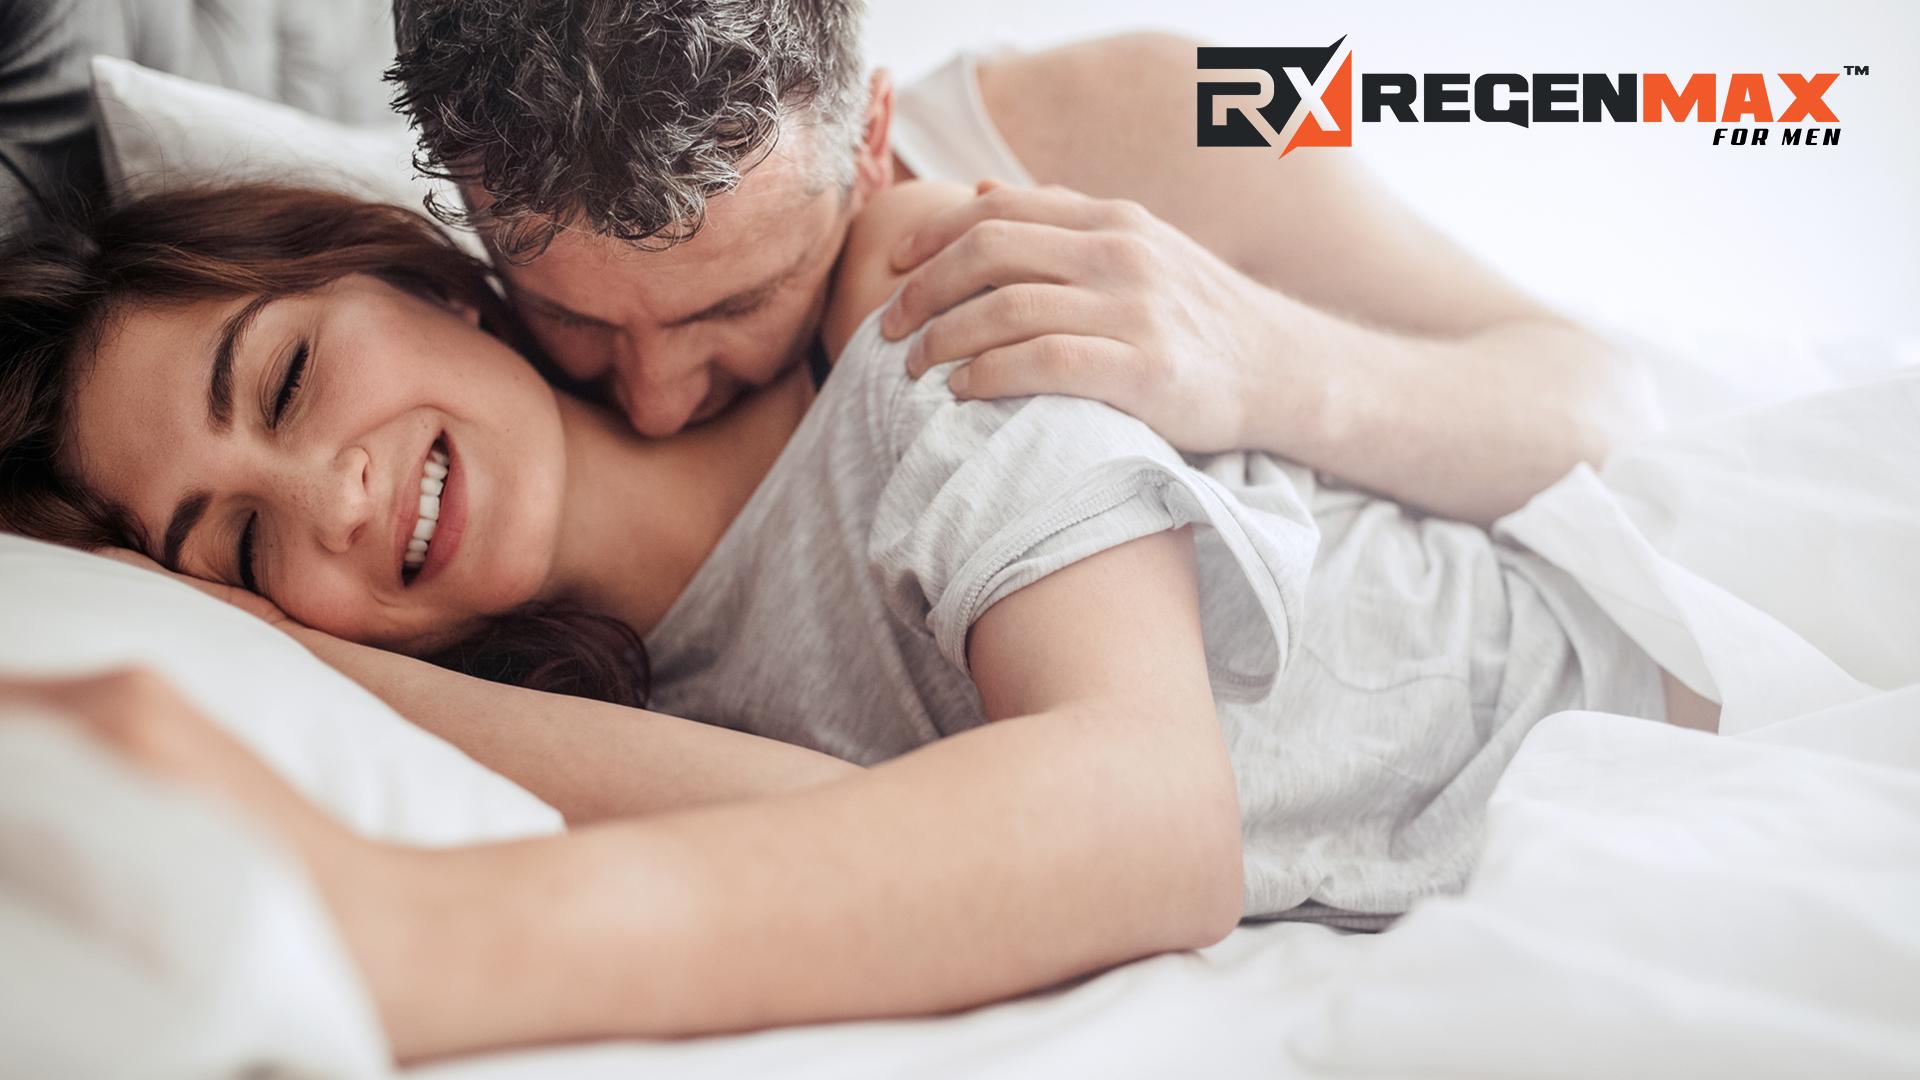 Sexual Wellness Centers of Texas REGENmax Treatments for Men SDC